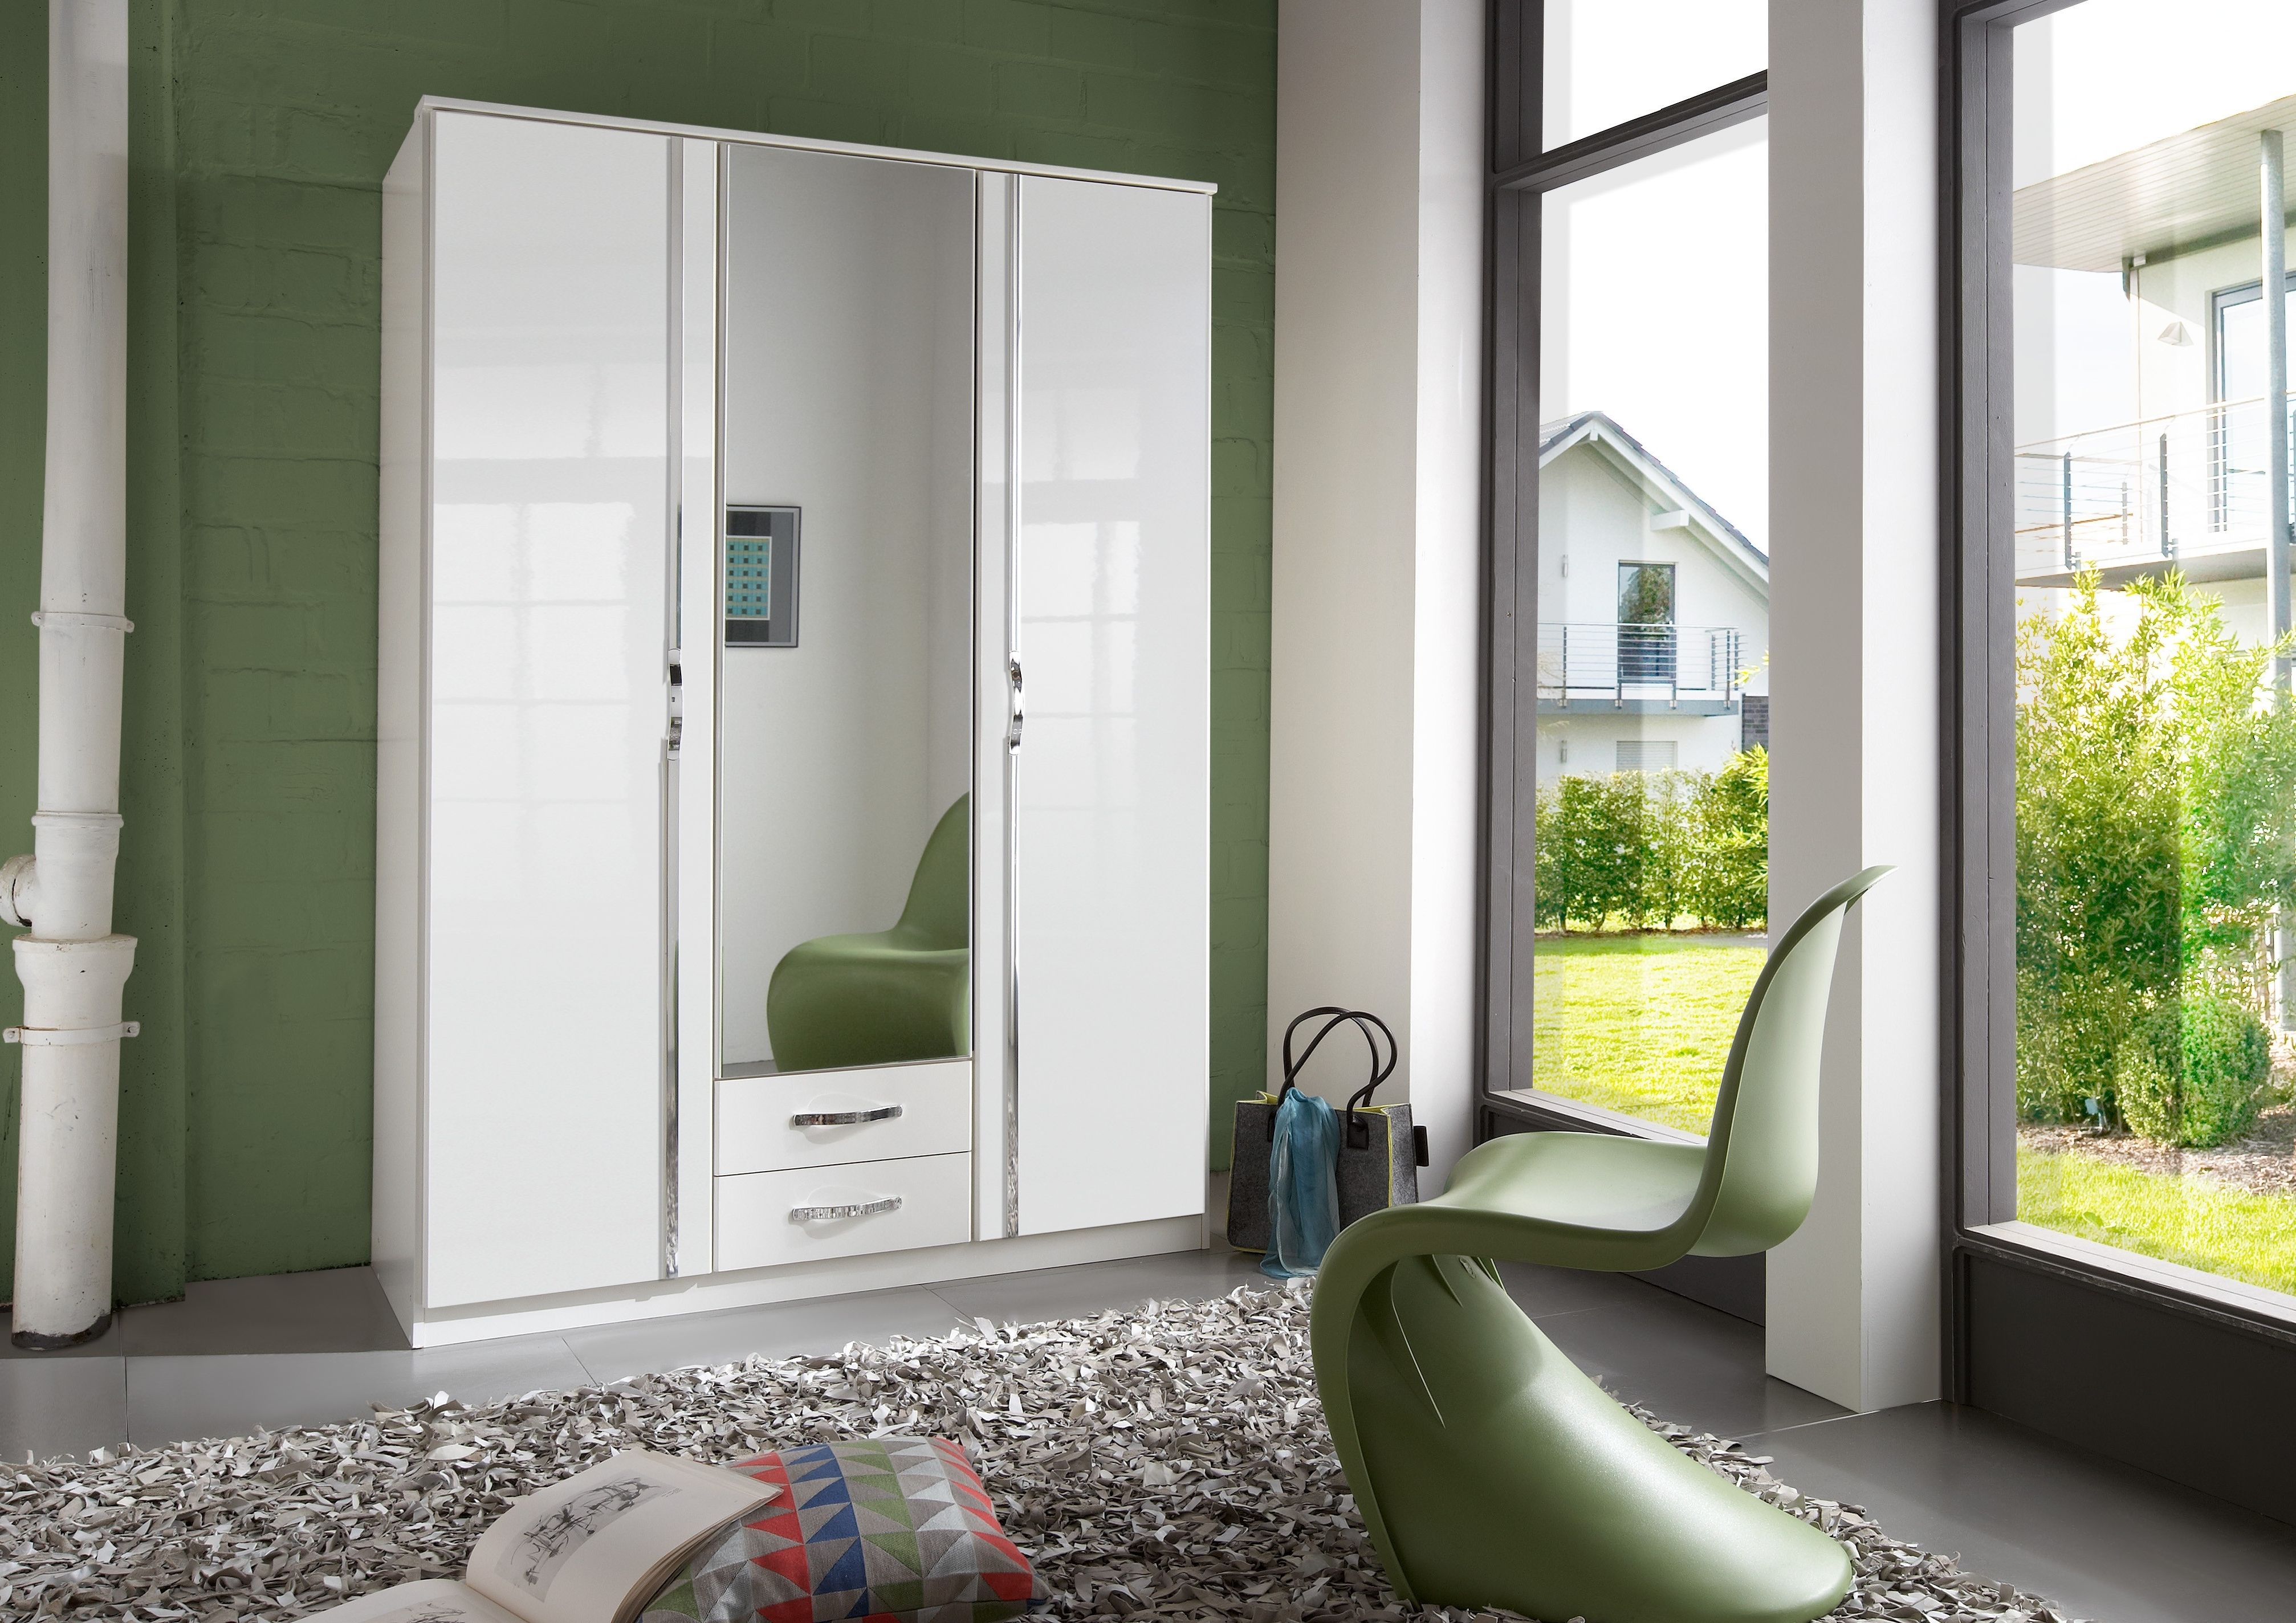 Current Funky High Gloss Bedroom Furniture Design – Hgnv Regarding White Gloss Wardrobes Sets (View 13 of 15)